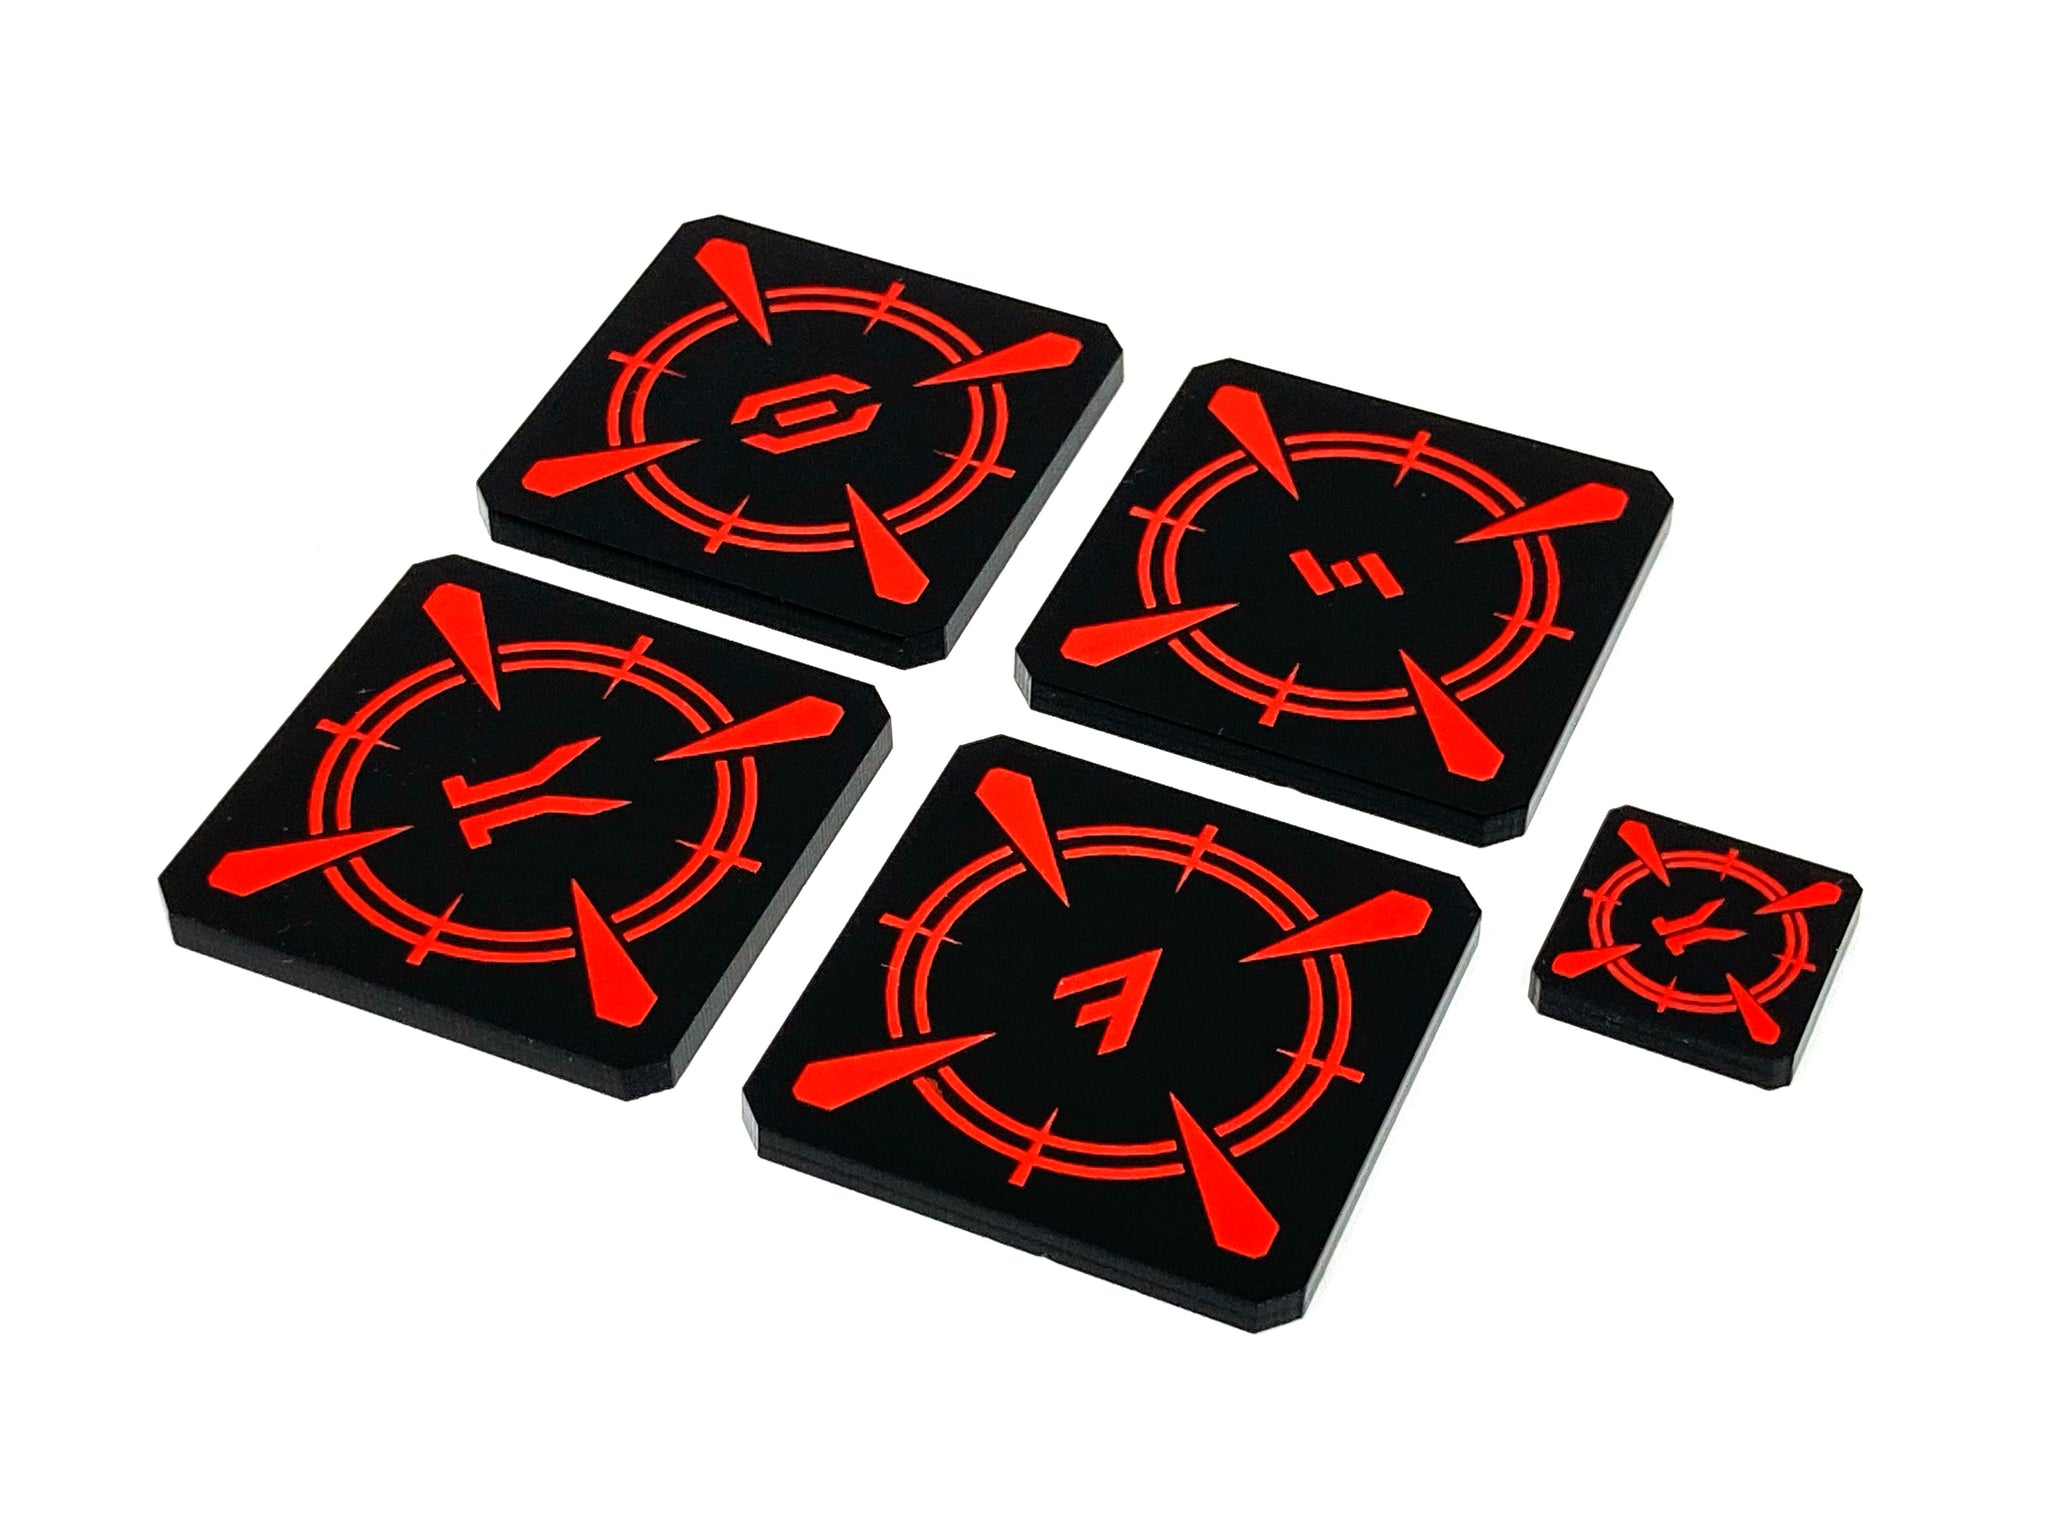 4 x Over-sized Target Locks Tokens